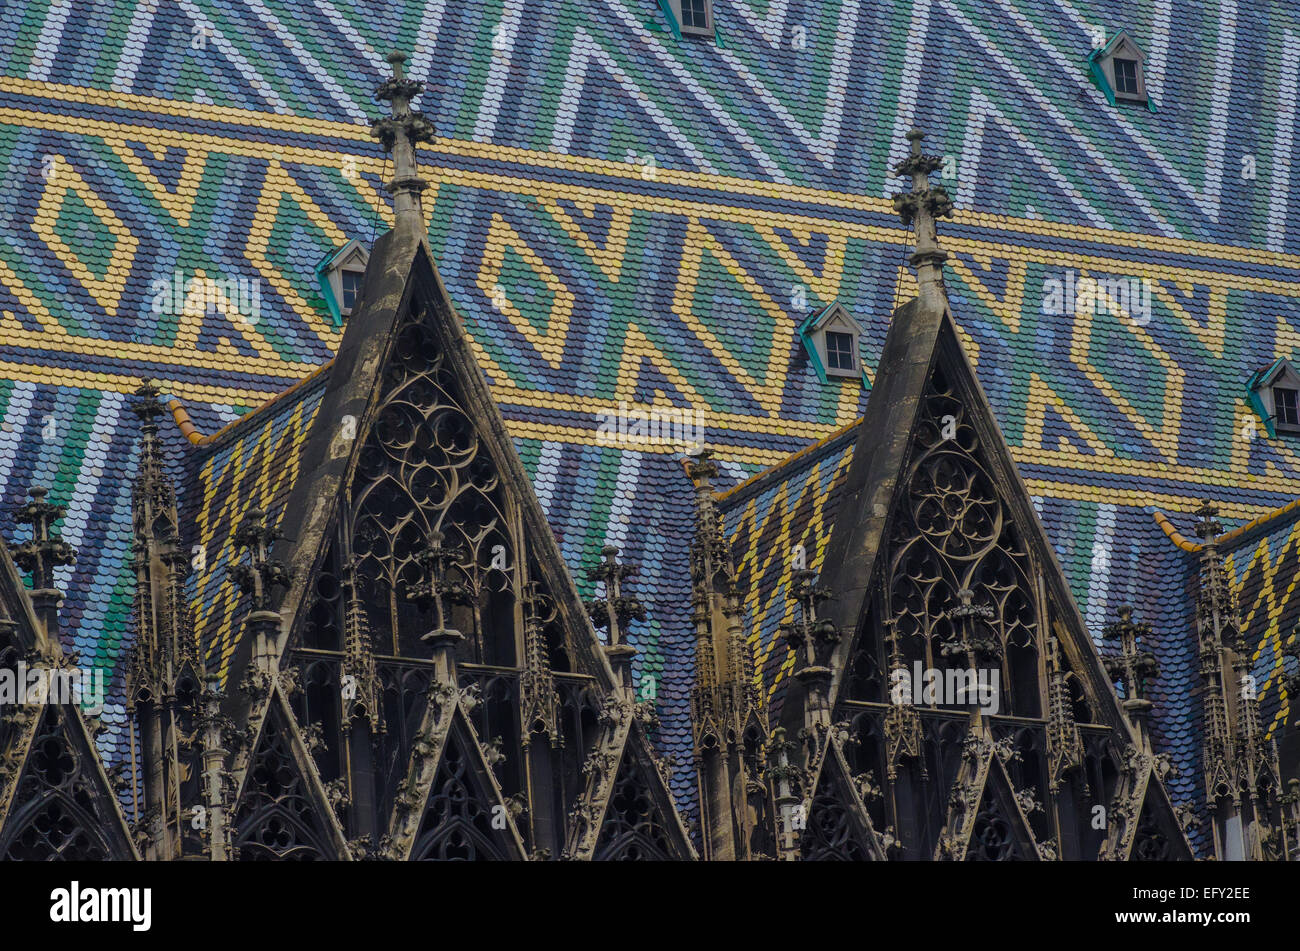 The historic St. Stephen's Cathedral in Vienna, Austria is famous for its dazzling rooftop patterns and colors. Stock Photo